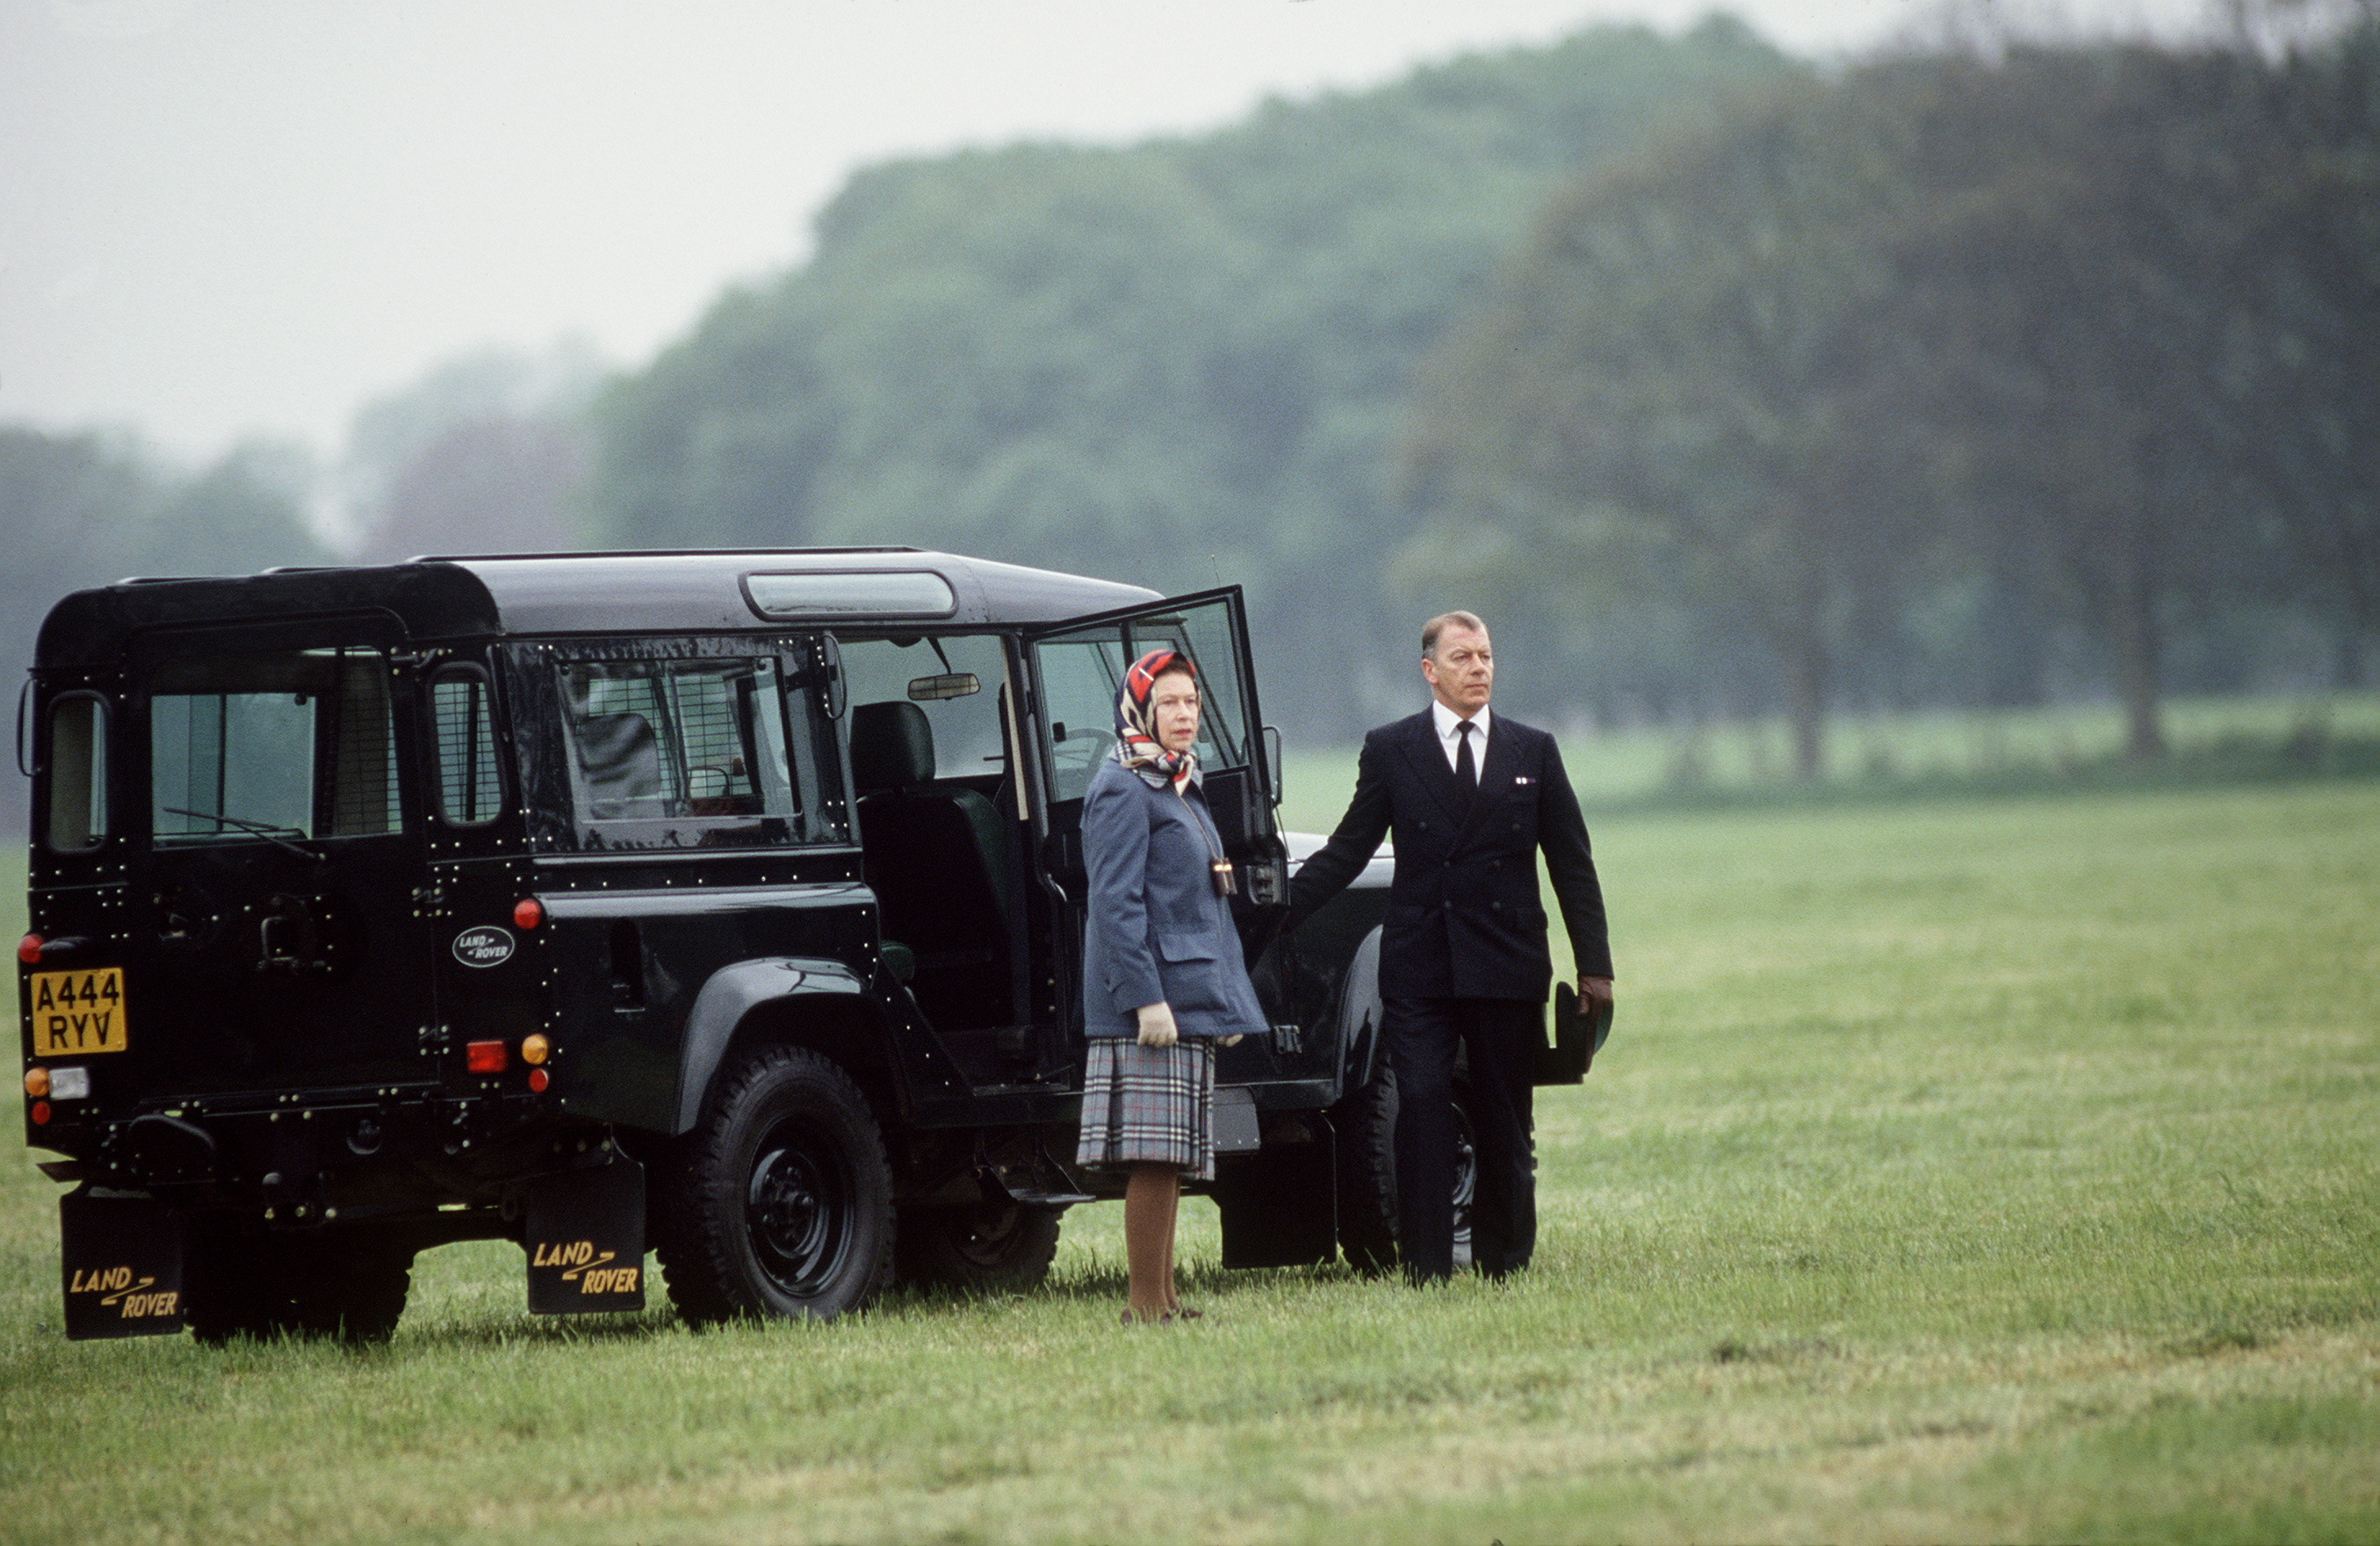 The Queen's driver pauses while the Queen prepares to board her Land Rover Defender.